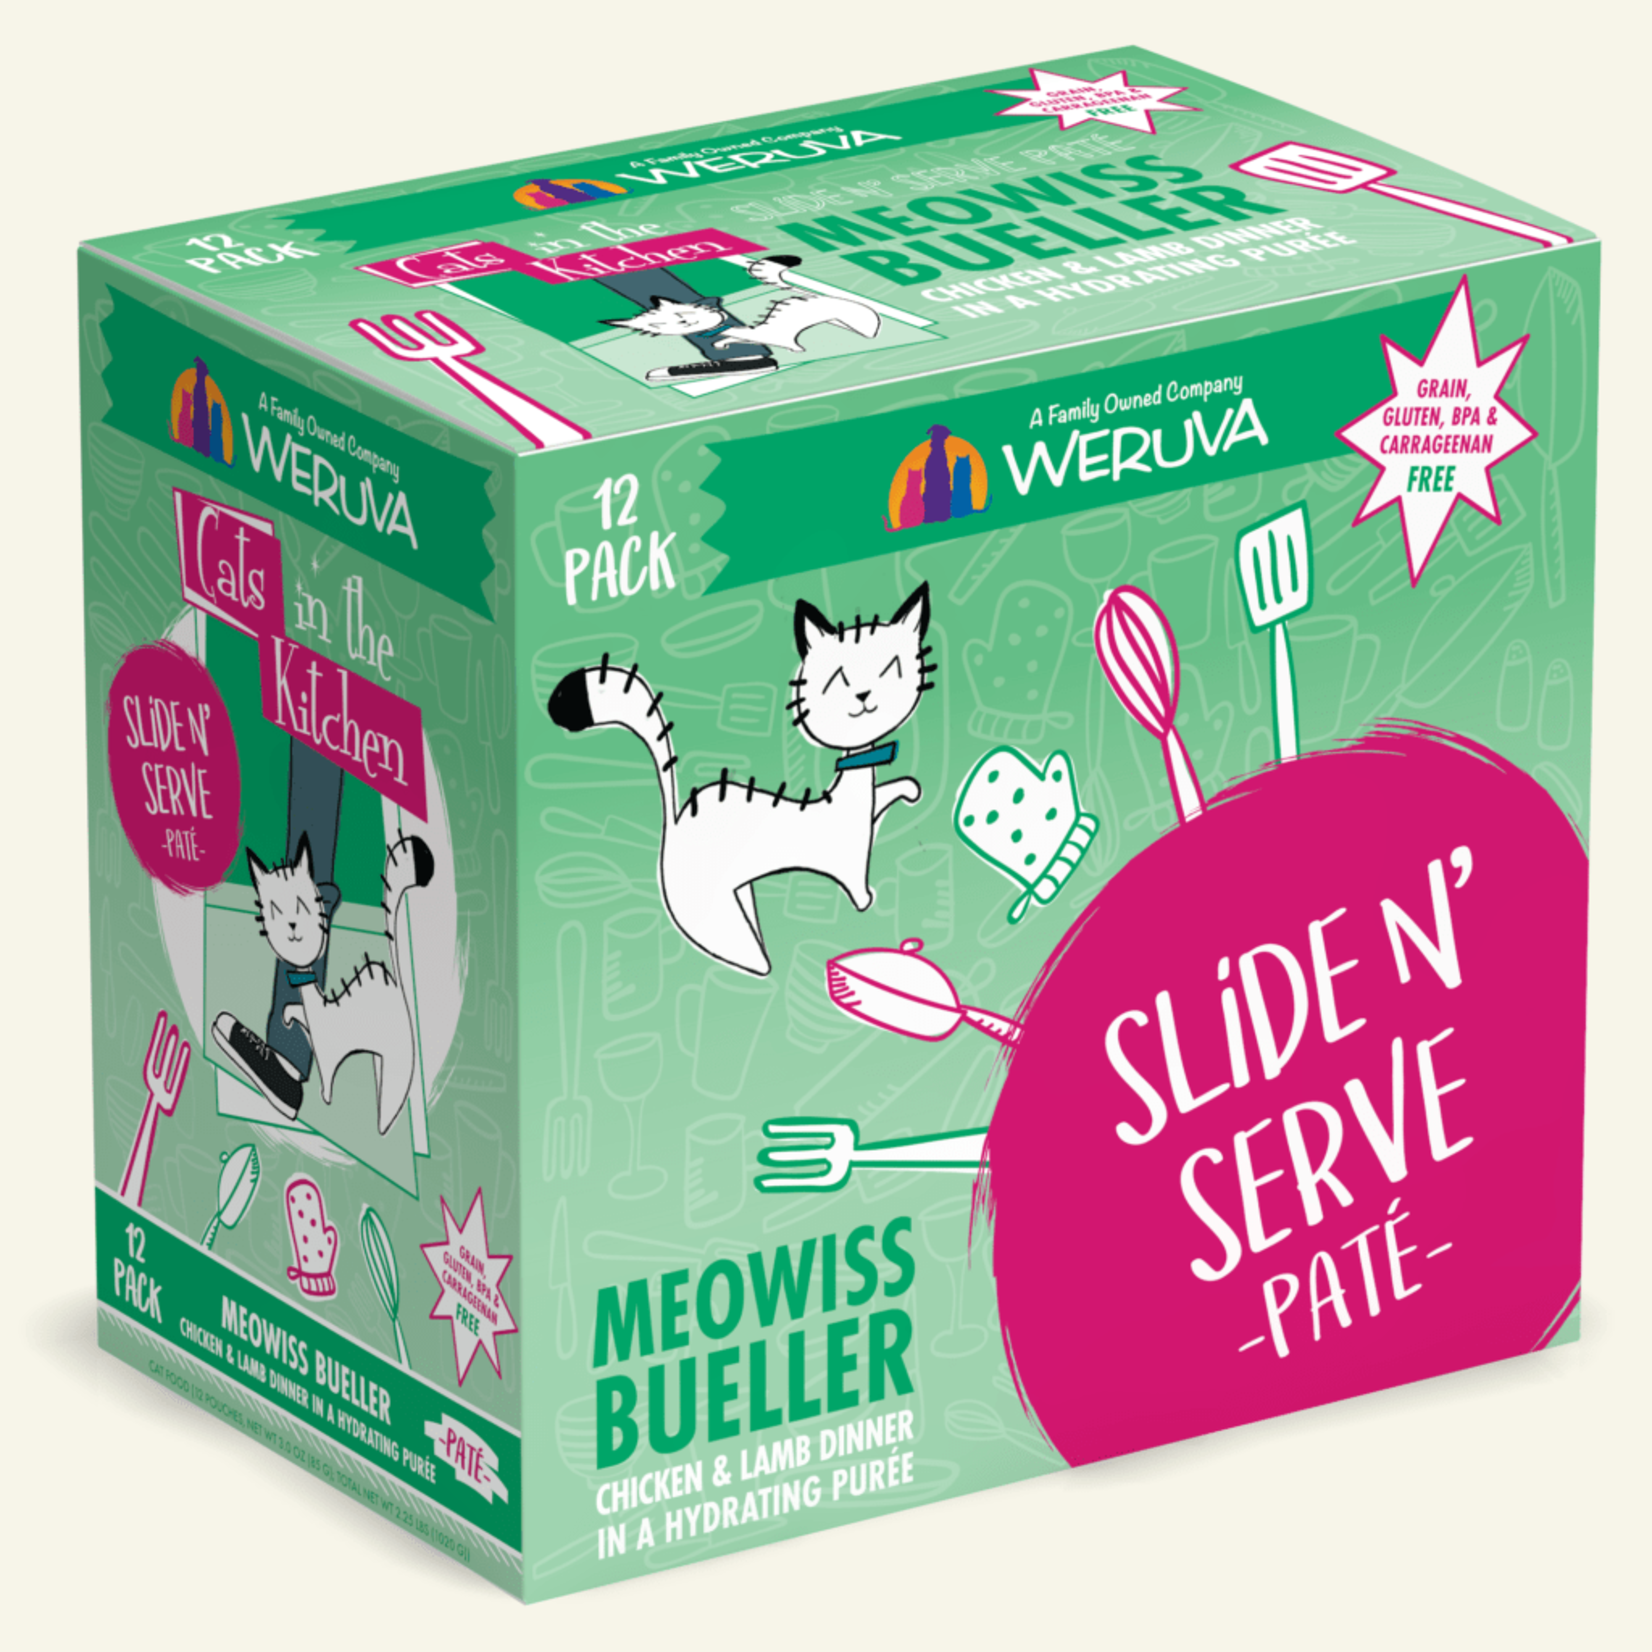 Weruva Weruva Wet Cat Food Cats in the Kitchen Slide and Serve Pate Pouch Meowiss Bueller Chicken and Lamb Dinner 3oz